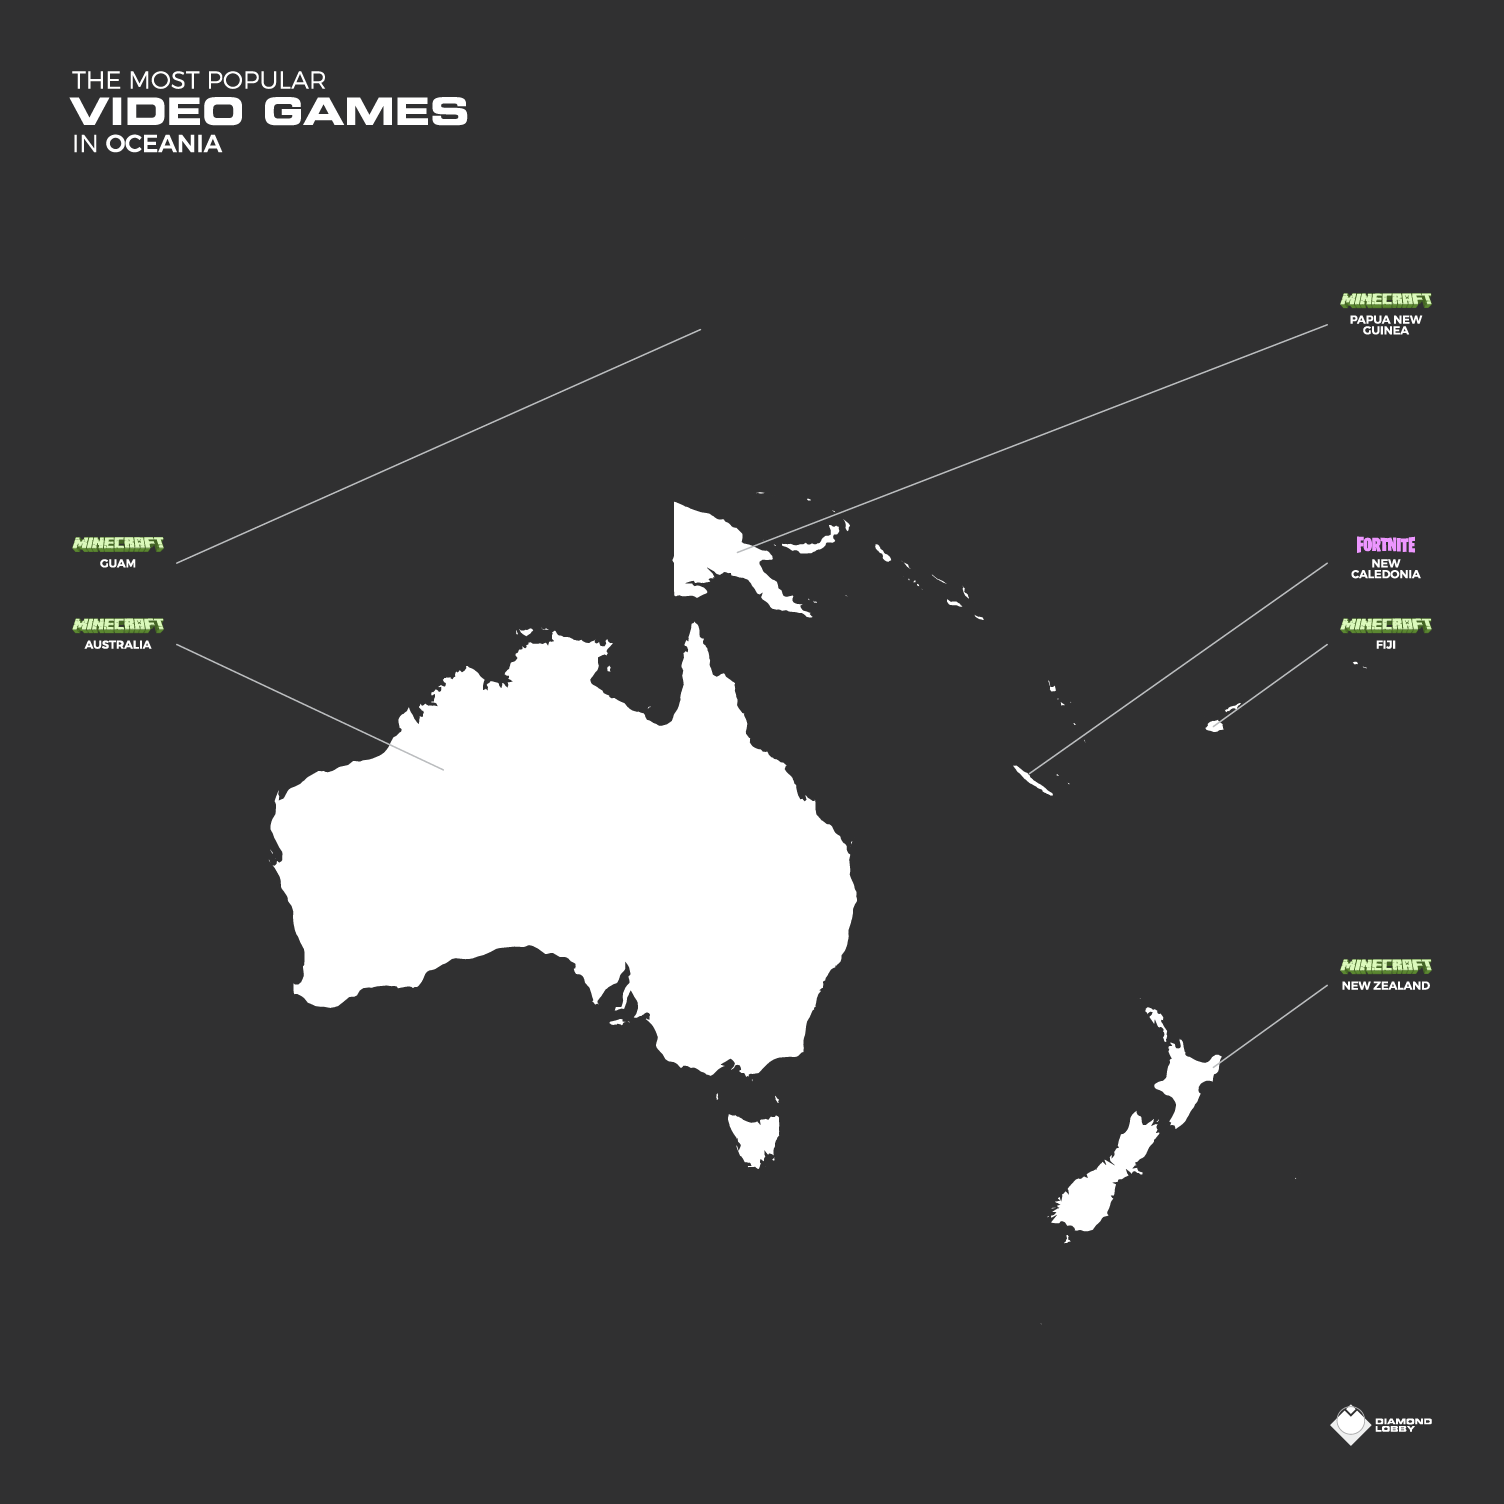 A map showing the most popular games in Oceania with each country labeled.